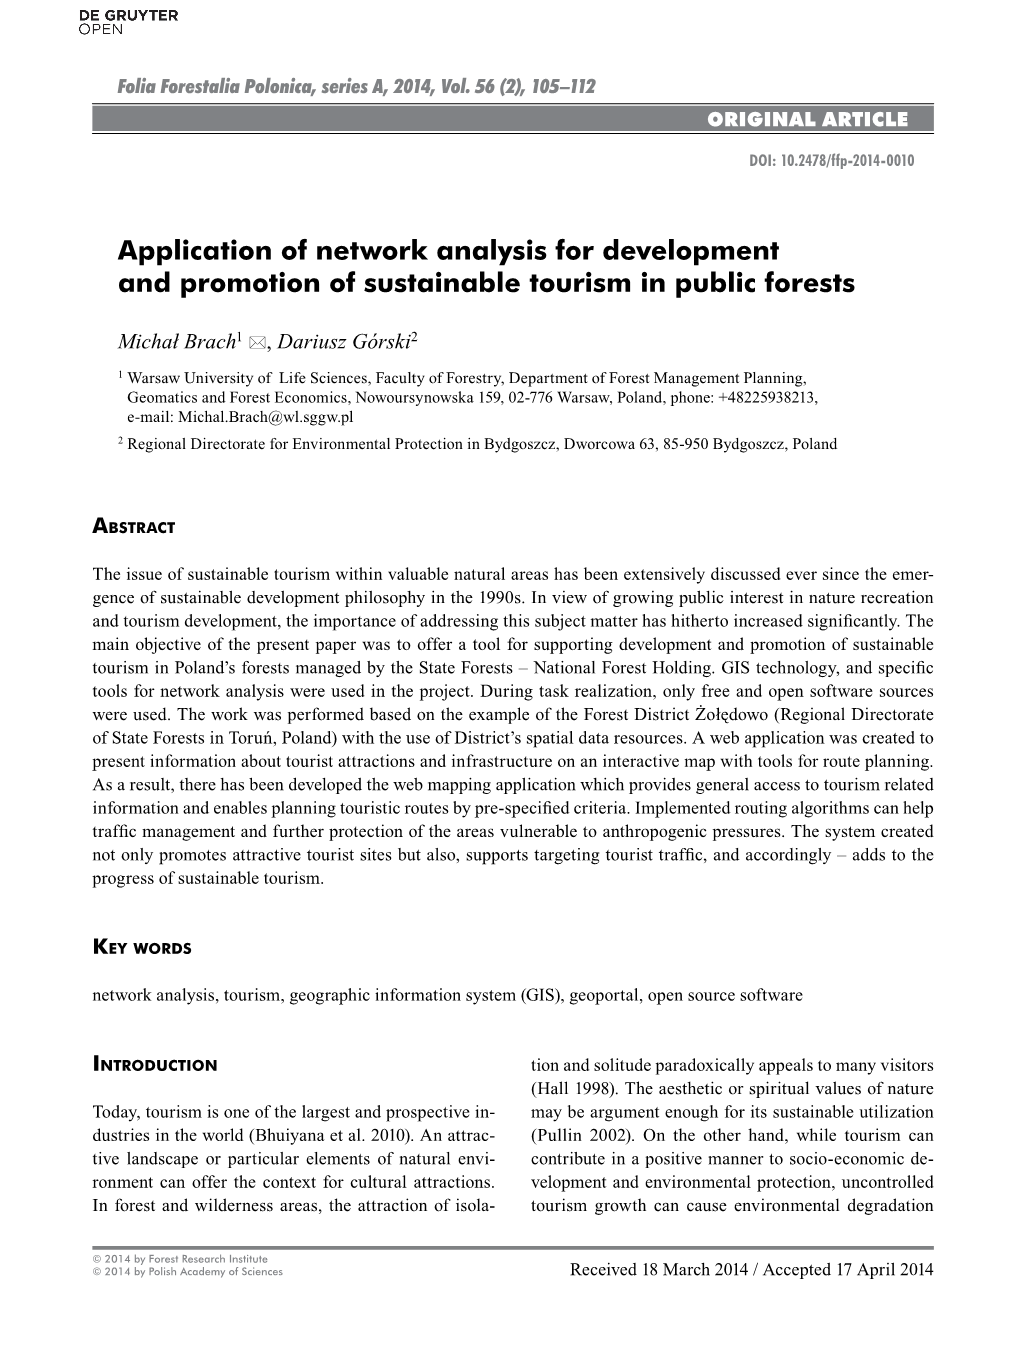 Application of Network Analysis for Development and Promotion of Sustainable Tourism in Public Forests